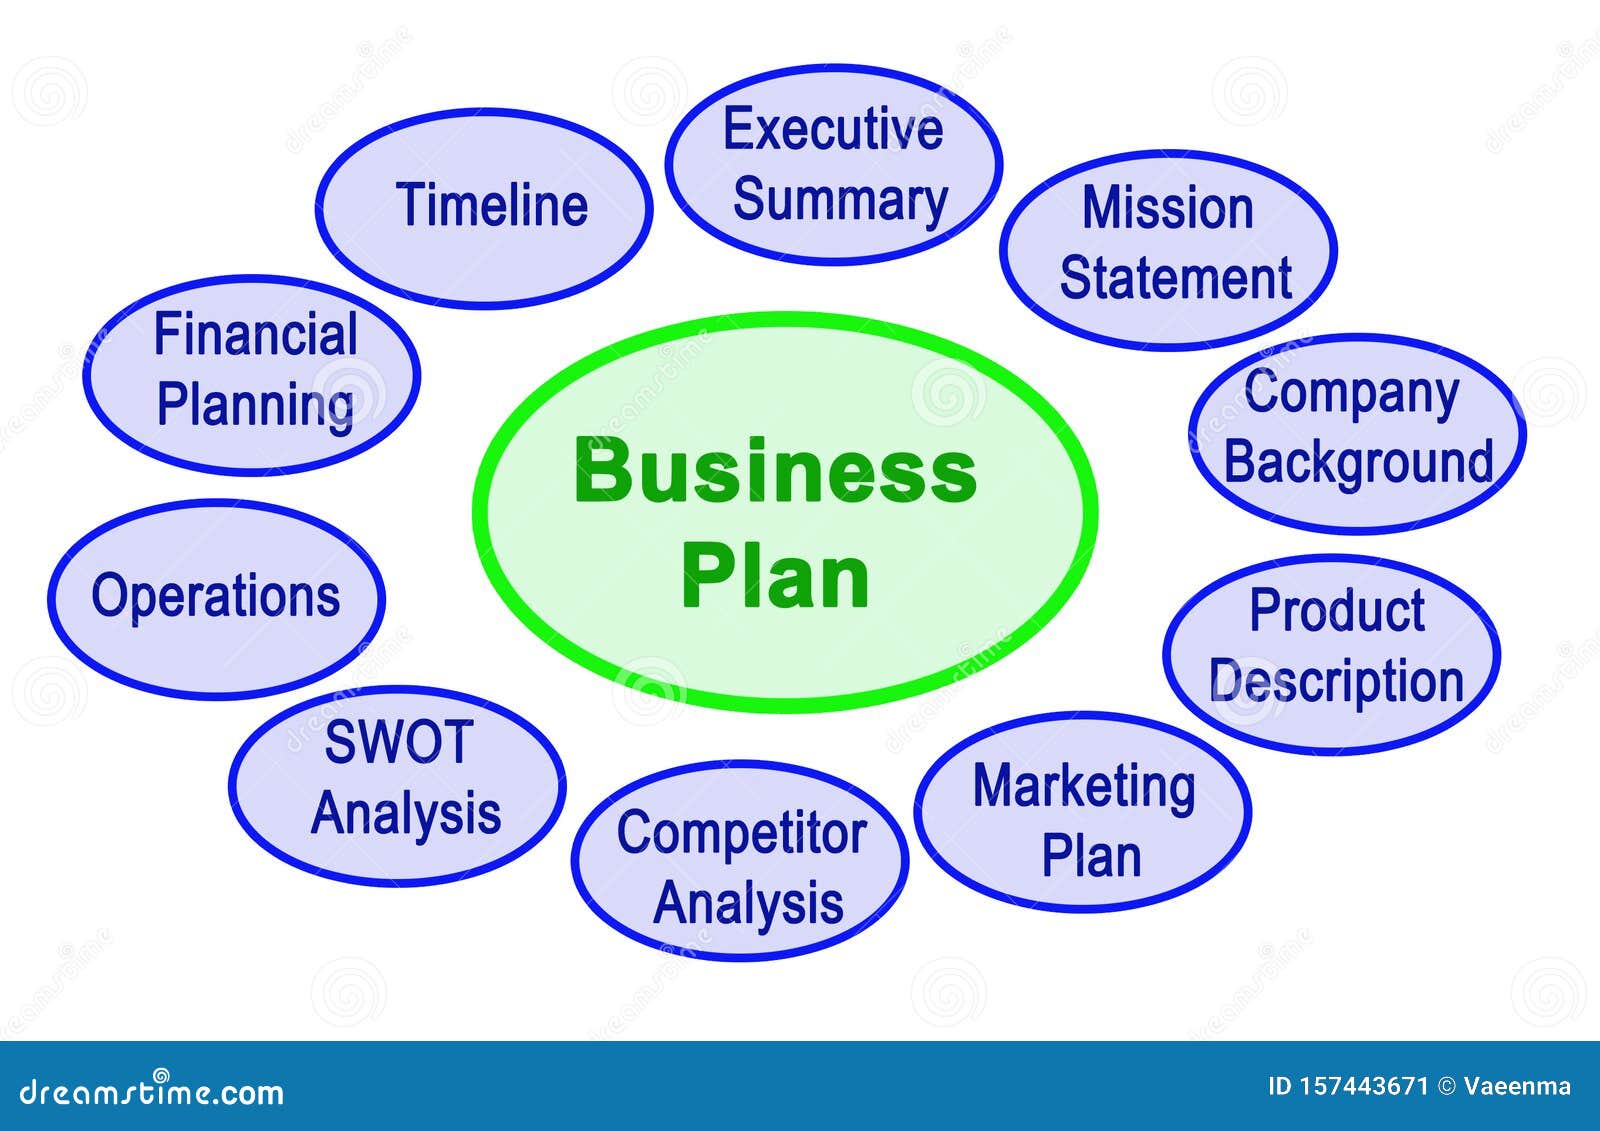 identify the key elements of a business plan